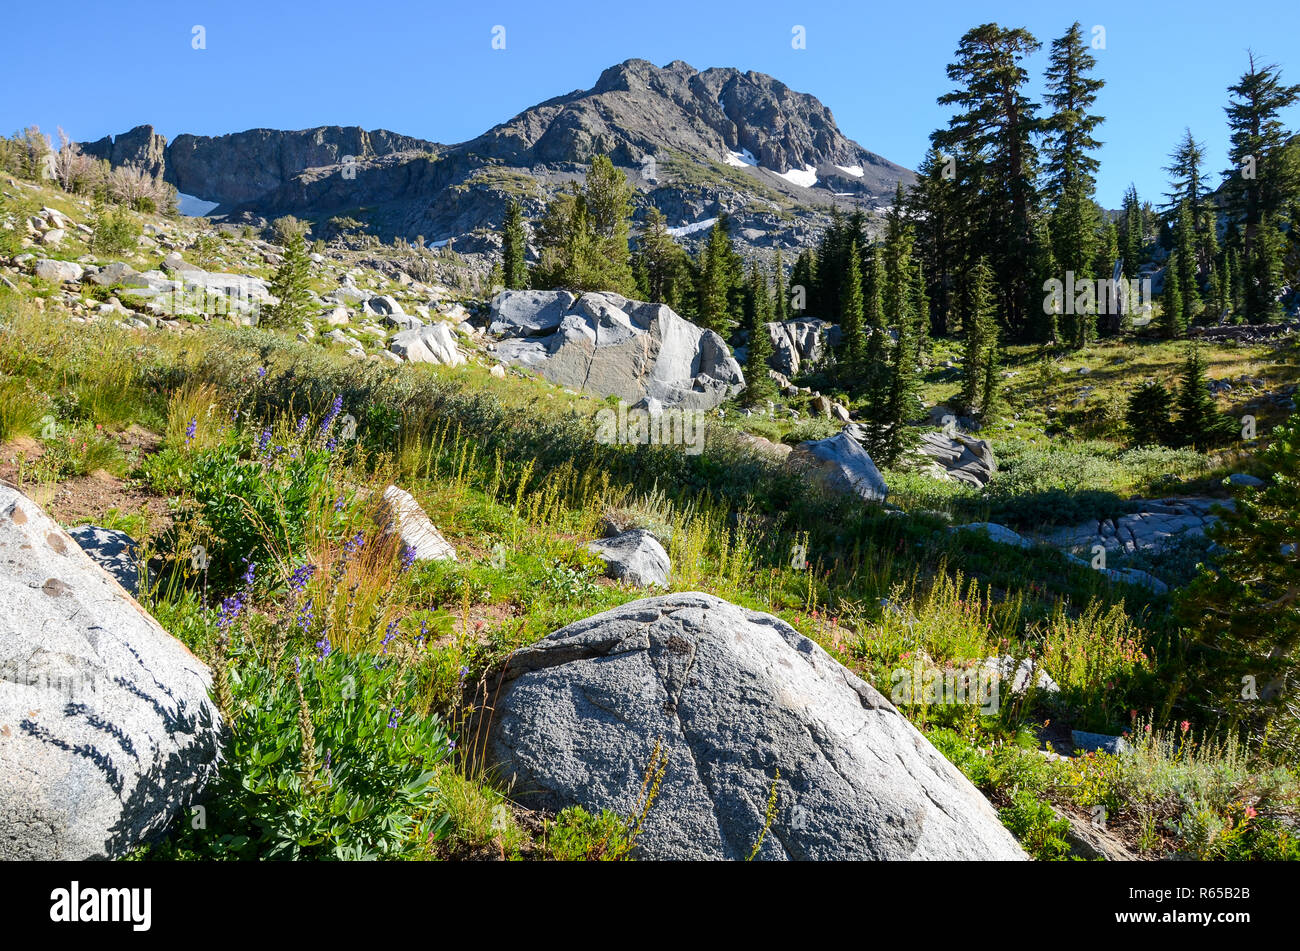 Alpine meadow with wildflowers and granite boulders under a high mountain peak in California's Sierra Nevada mountains Stock Photo